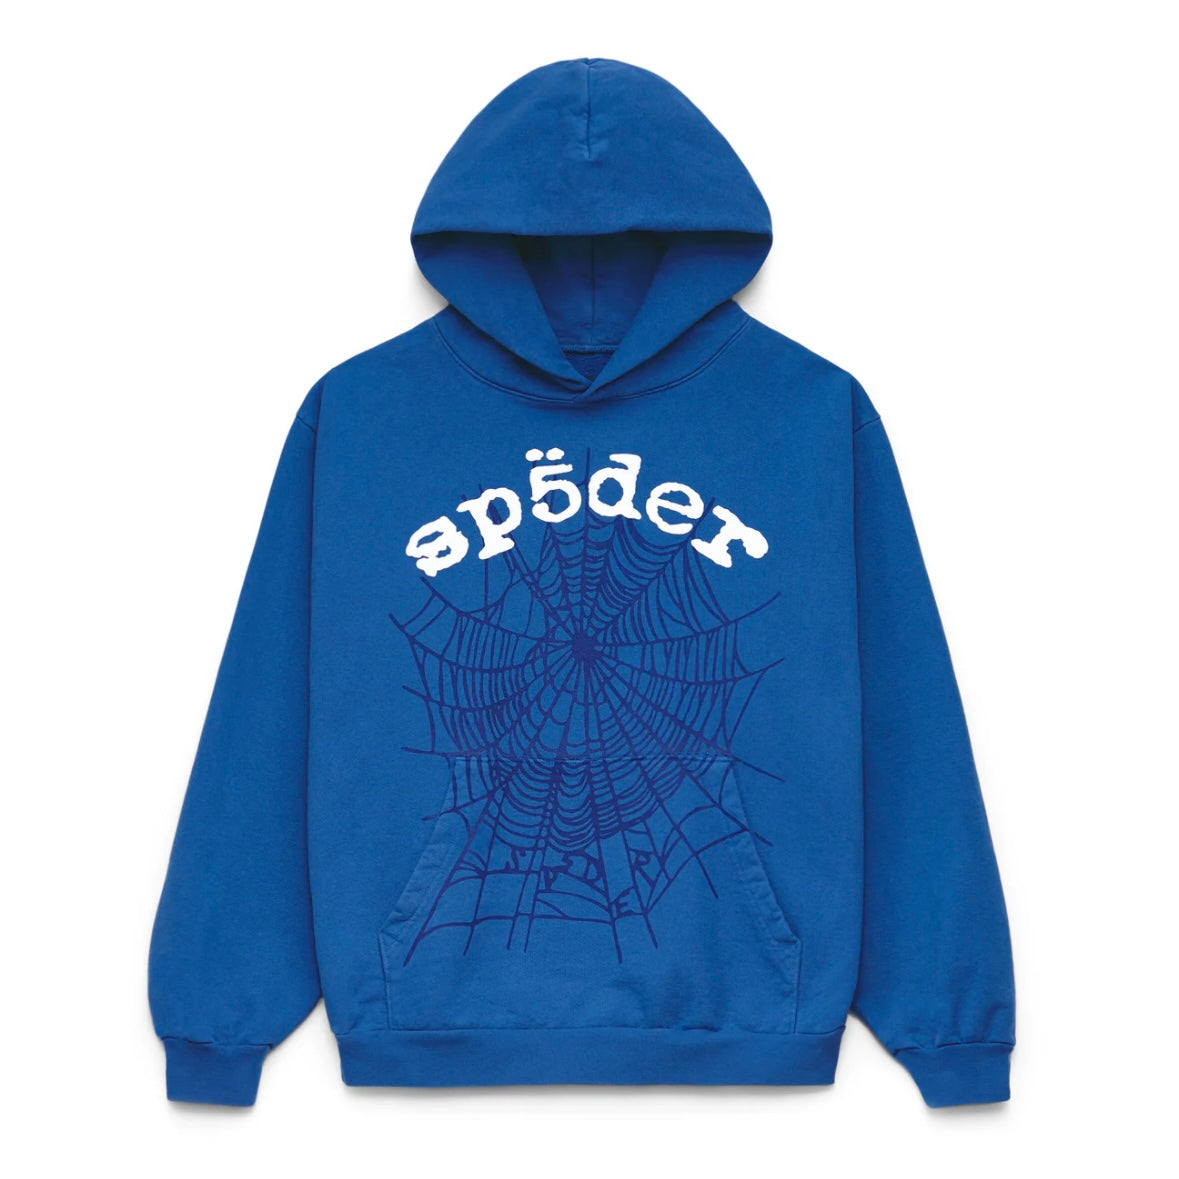 Sp5der Blue White Legacy Hoodie Front